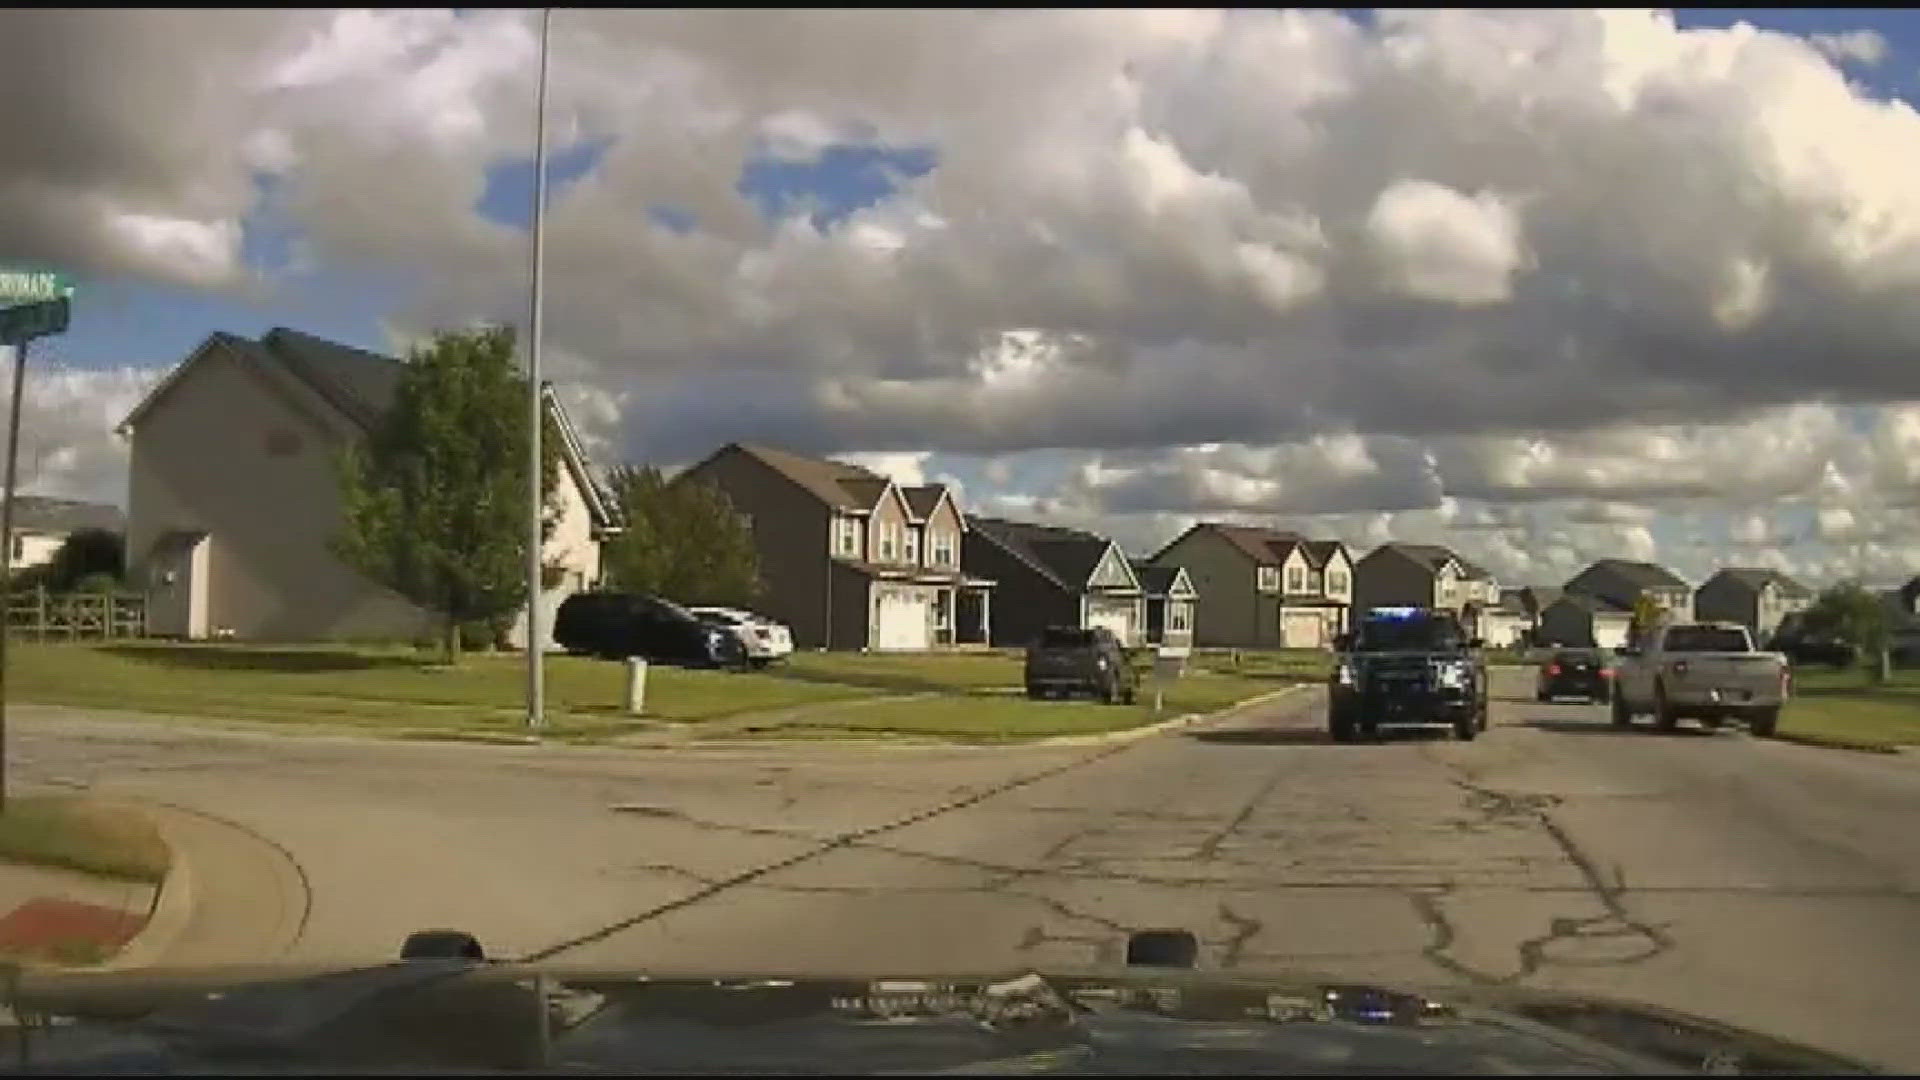 Body and dashcam video shows the suspect leading a parade of police vehicles through backyards, residential neighborhoods and northbound on I-475.